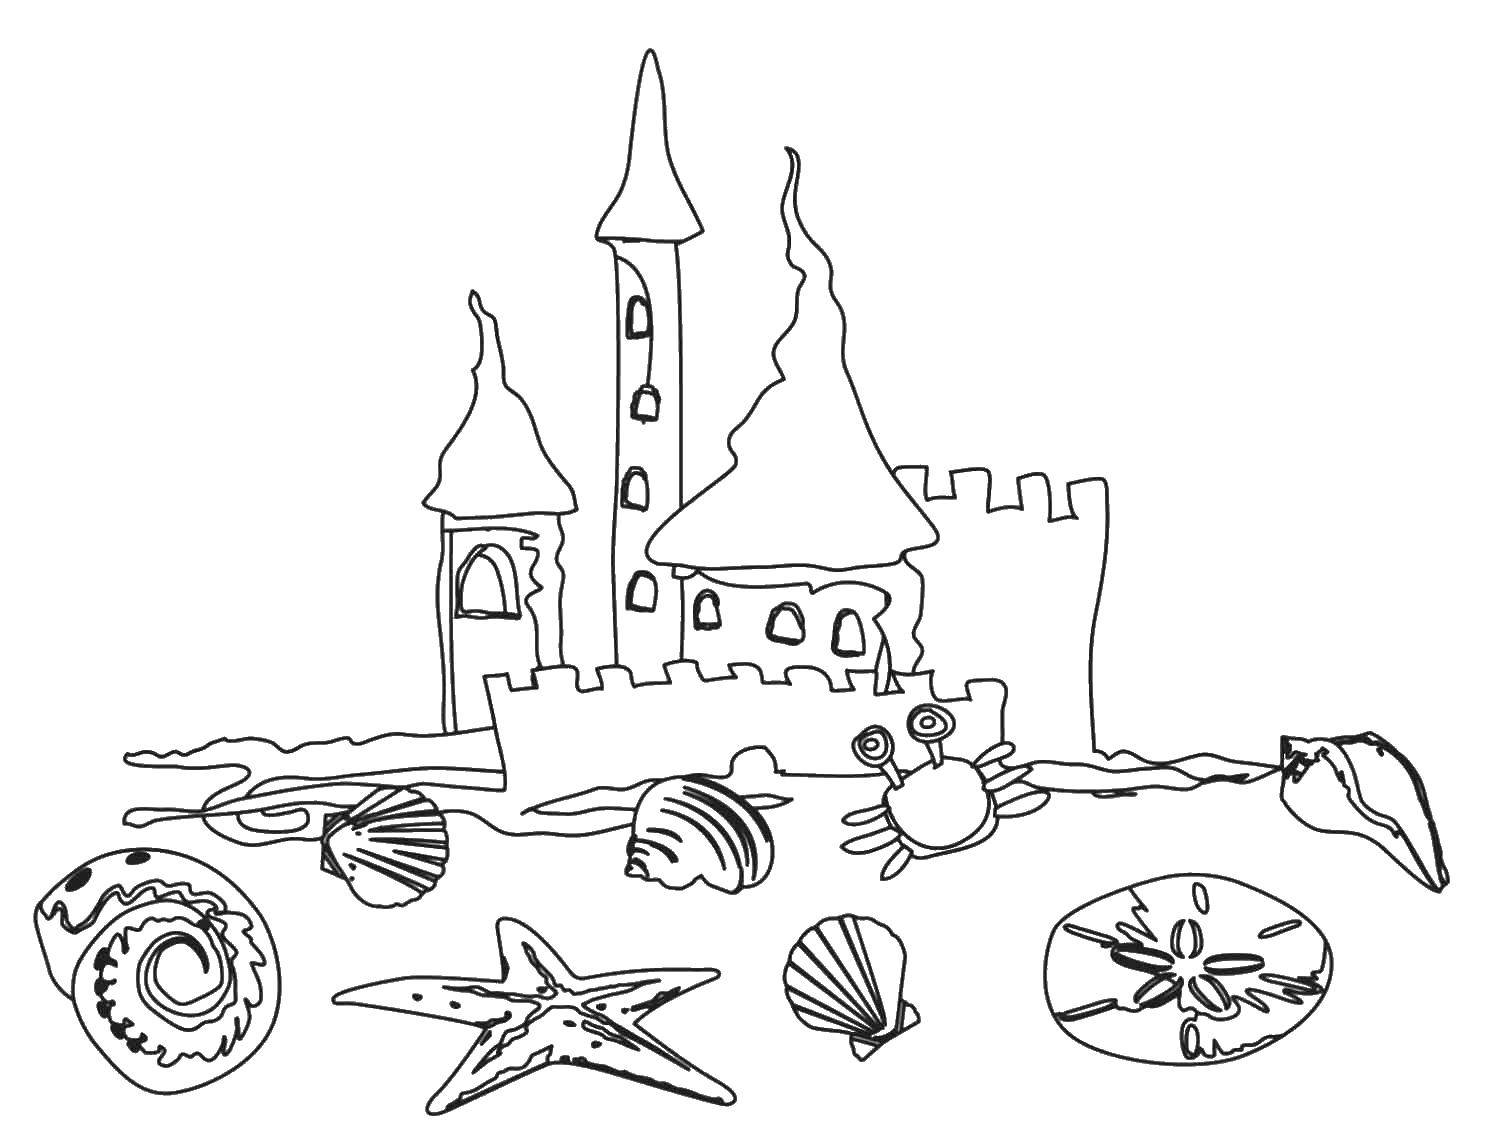 Coloring Sea castle. Category Summer beach. Tags:  Beach, sand castle, crab, ball, starfish.